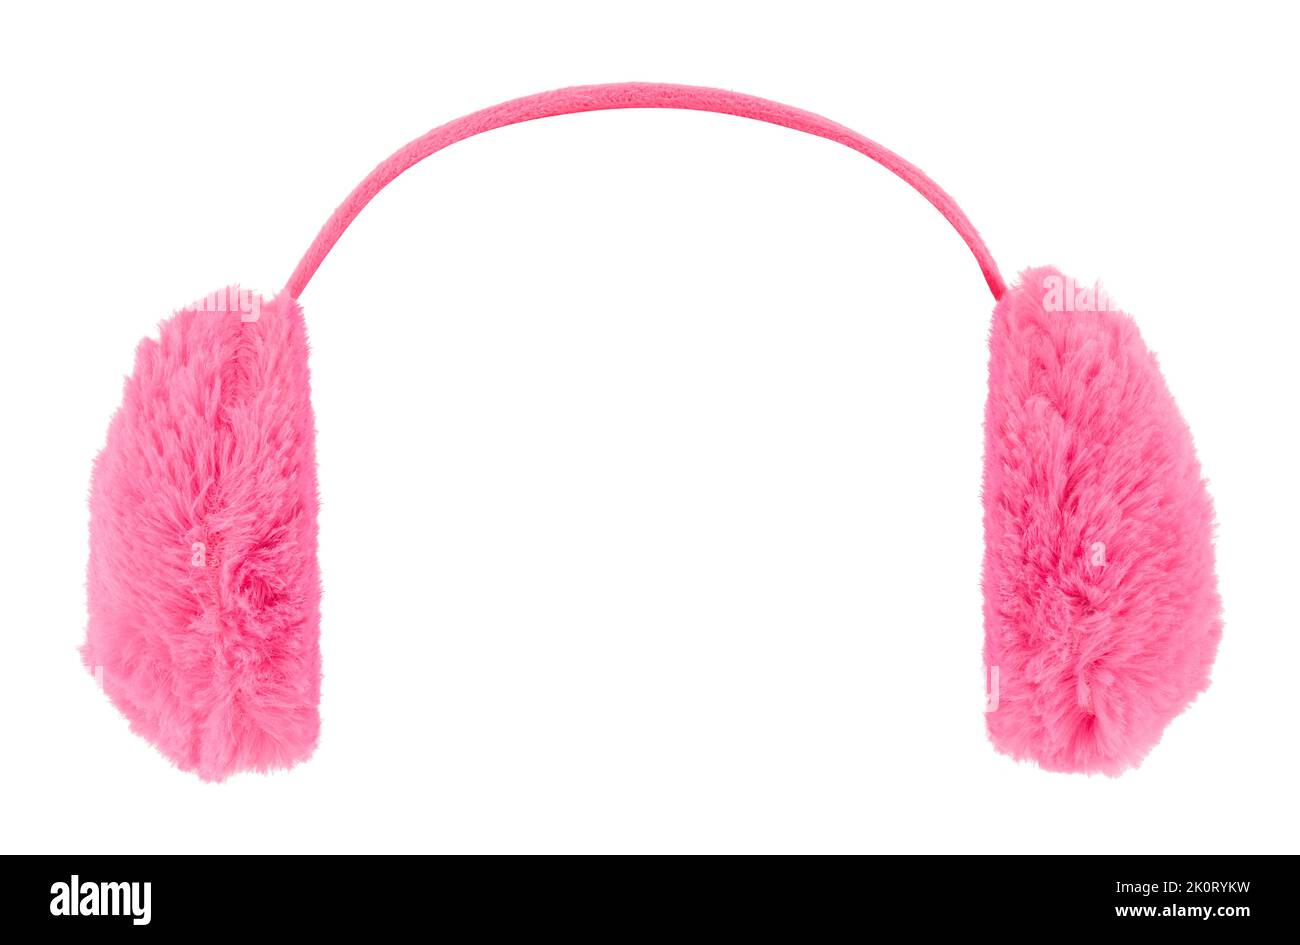 Pink Ear Muffs Cut Out on White. Stock Photo